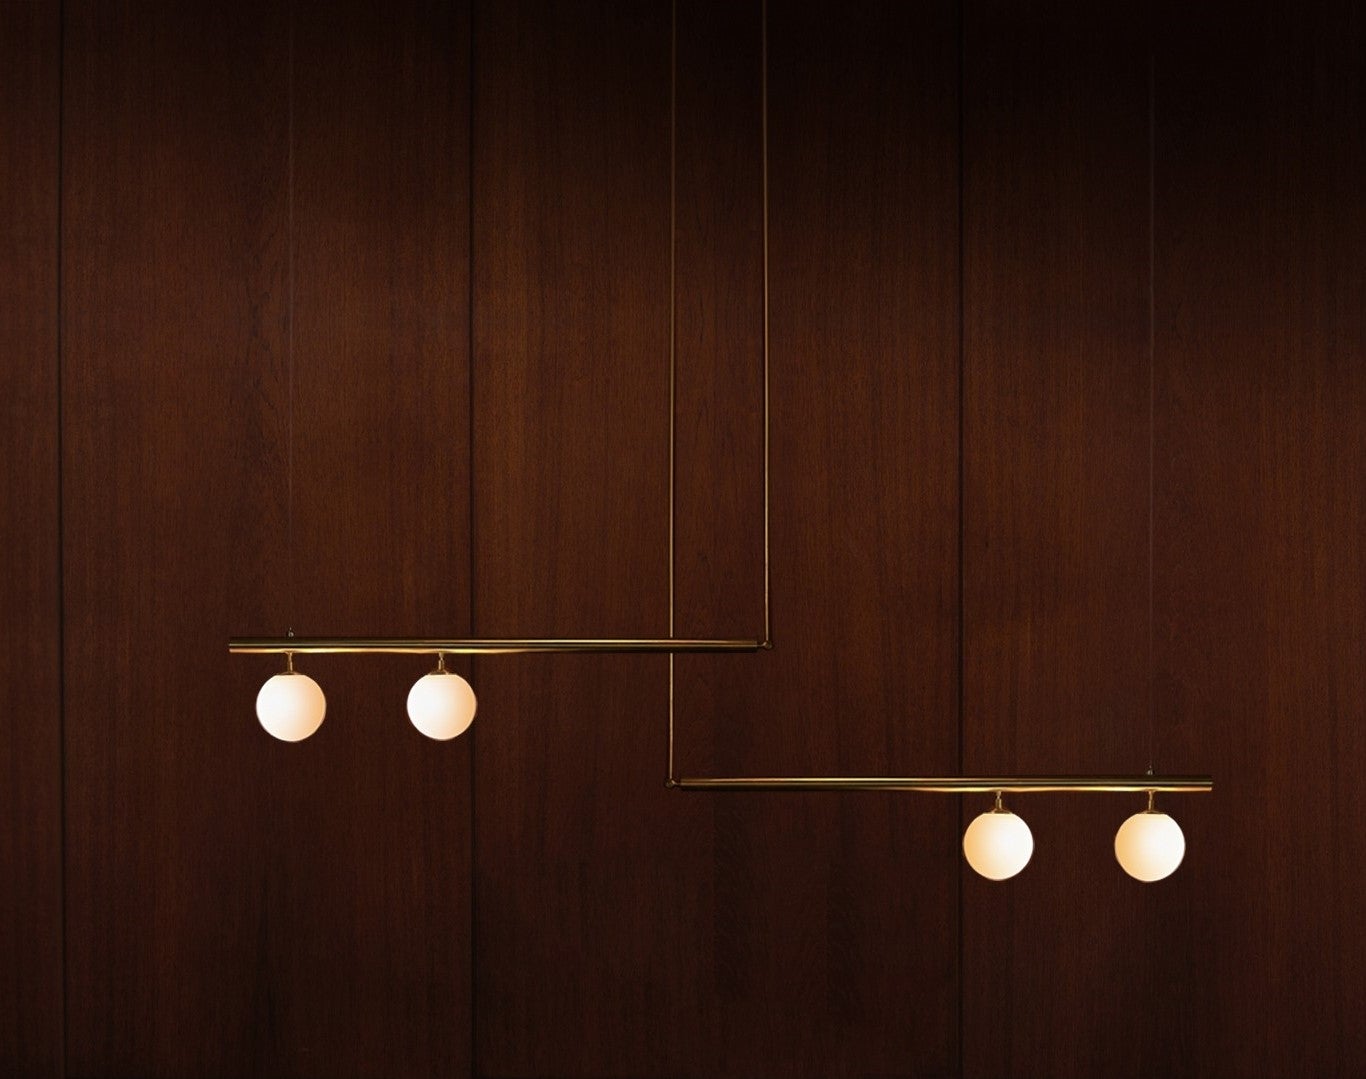 Satellite II + II, sculpted pendant by Paul Matter.
Dimensions: D 15 x W 246 x H 72.
Materials: Brass, glass.
Available in other finishes.

Satellite is inspired by the conceptual and Minimalist movement of the 1960s and 1970s. These light